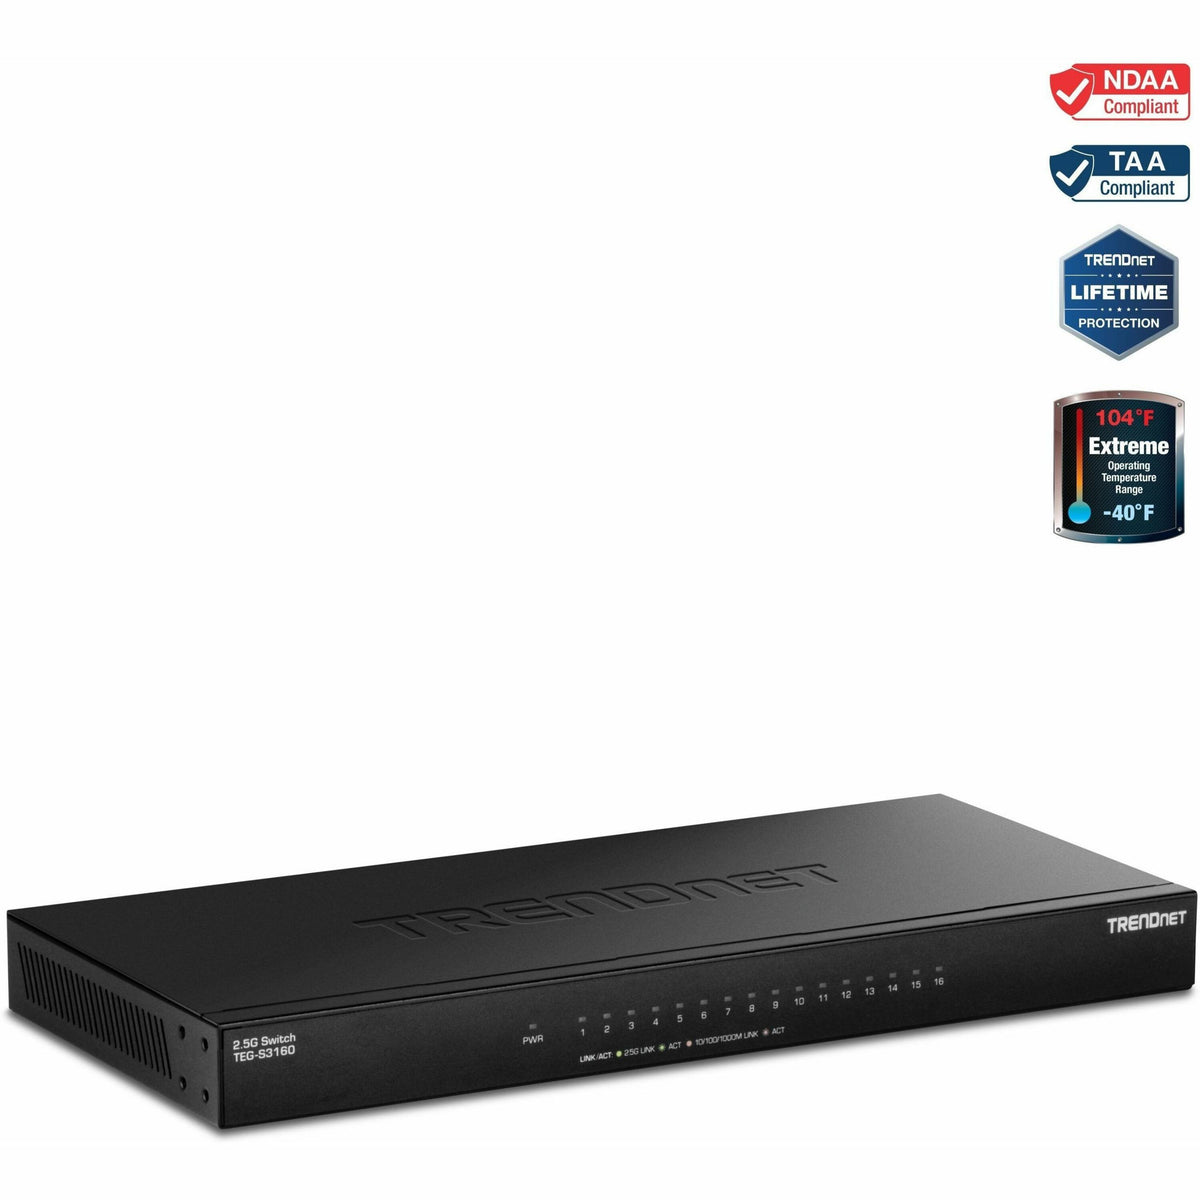 TRENDnet 16-Port Unmanaged 2.5G Desktop Network Ethernet Switch, TEG-S3160, 16 x 2.5Gb RJ-45 Ports, 80Gbps Switching Capacity, NDAA TAA Compliant, Lifetime Protection, Black - TEG-S3160